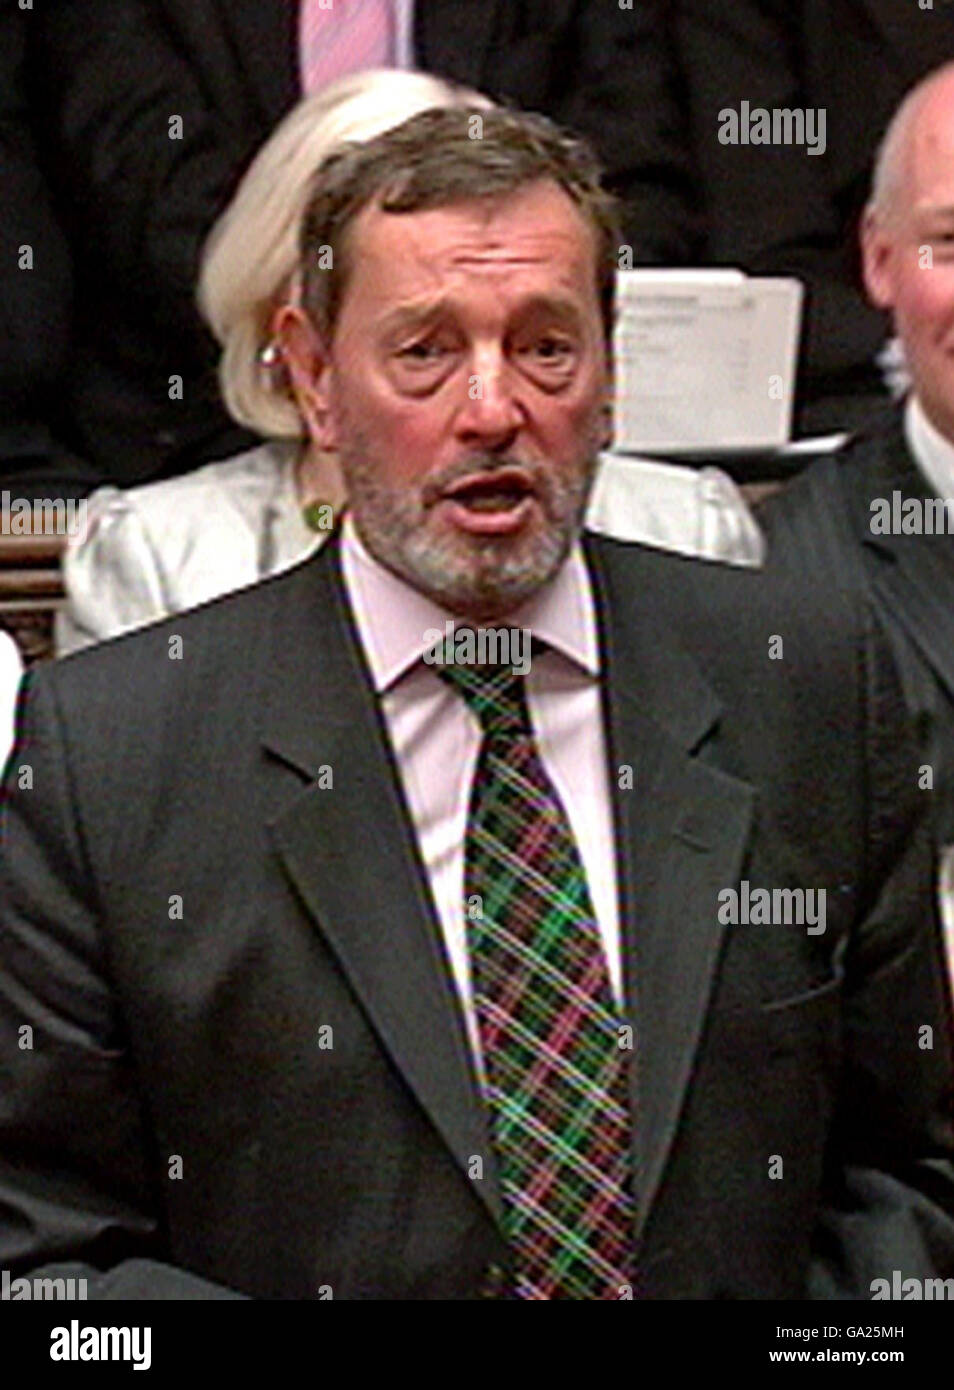 Former Cabinet Minister David Blunkett during Prime Minister Questions in the House of Commons, Central London. Stock Photo